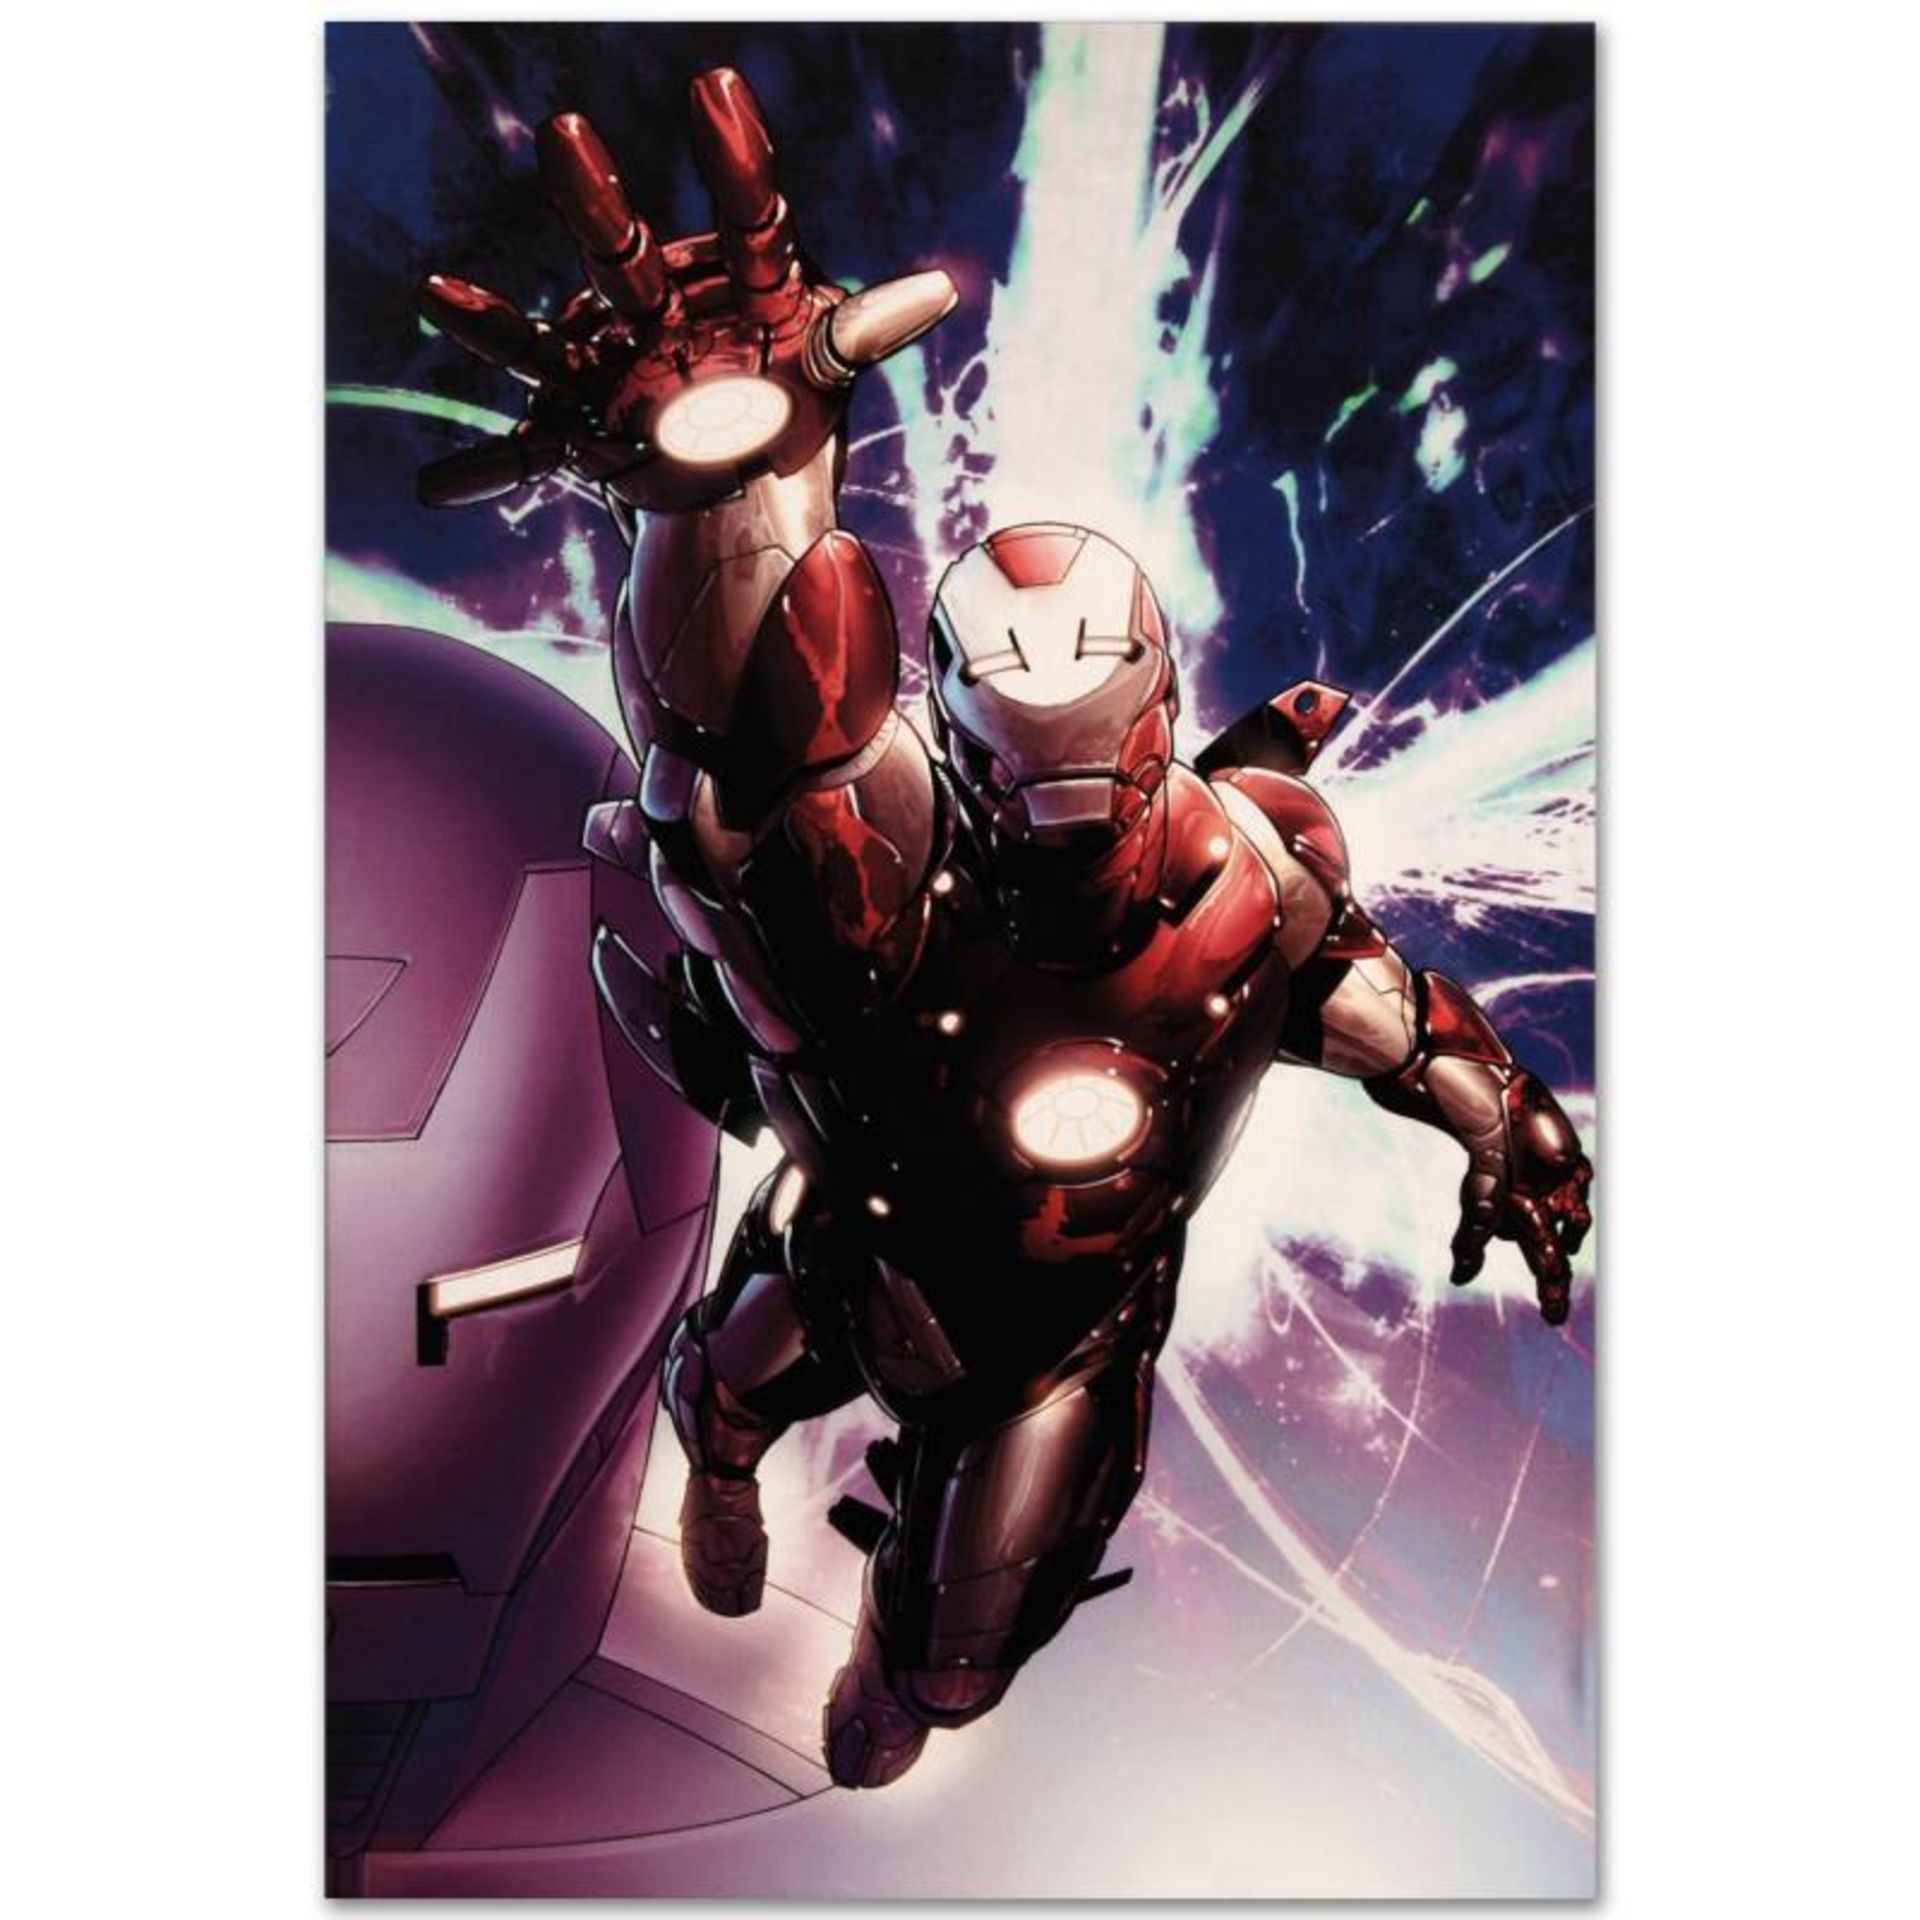 Marvel Comics "Invincible Iron Man #25" Numbered Limited Edition Giclee on Canva